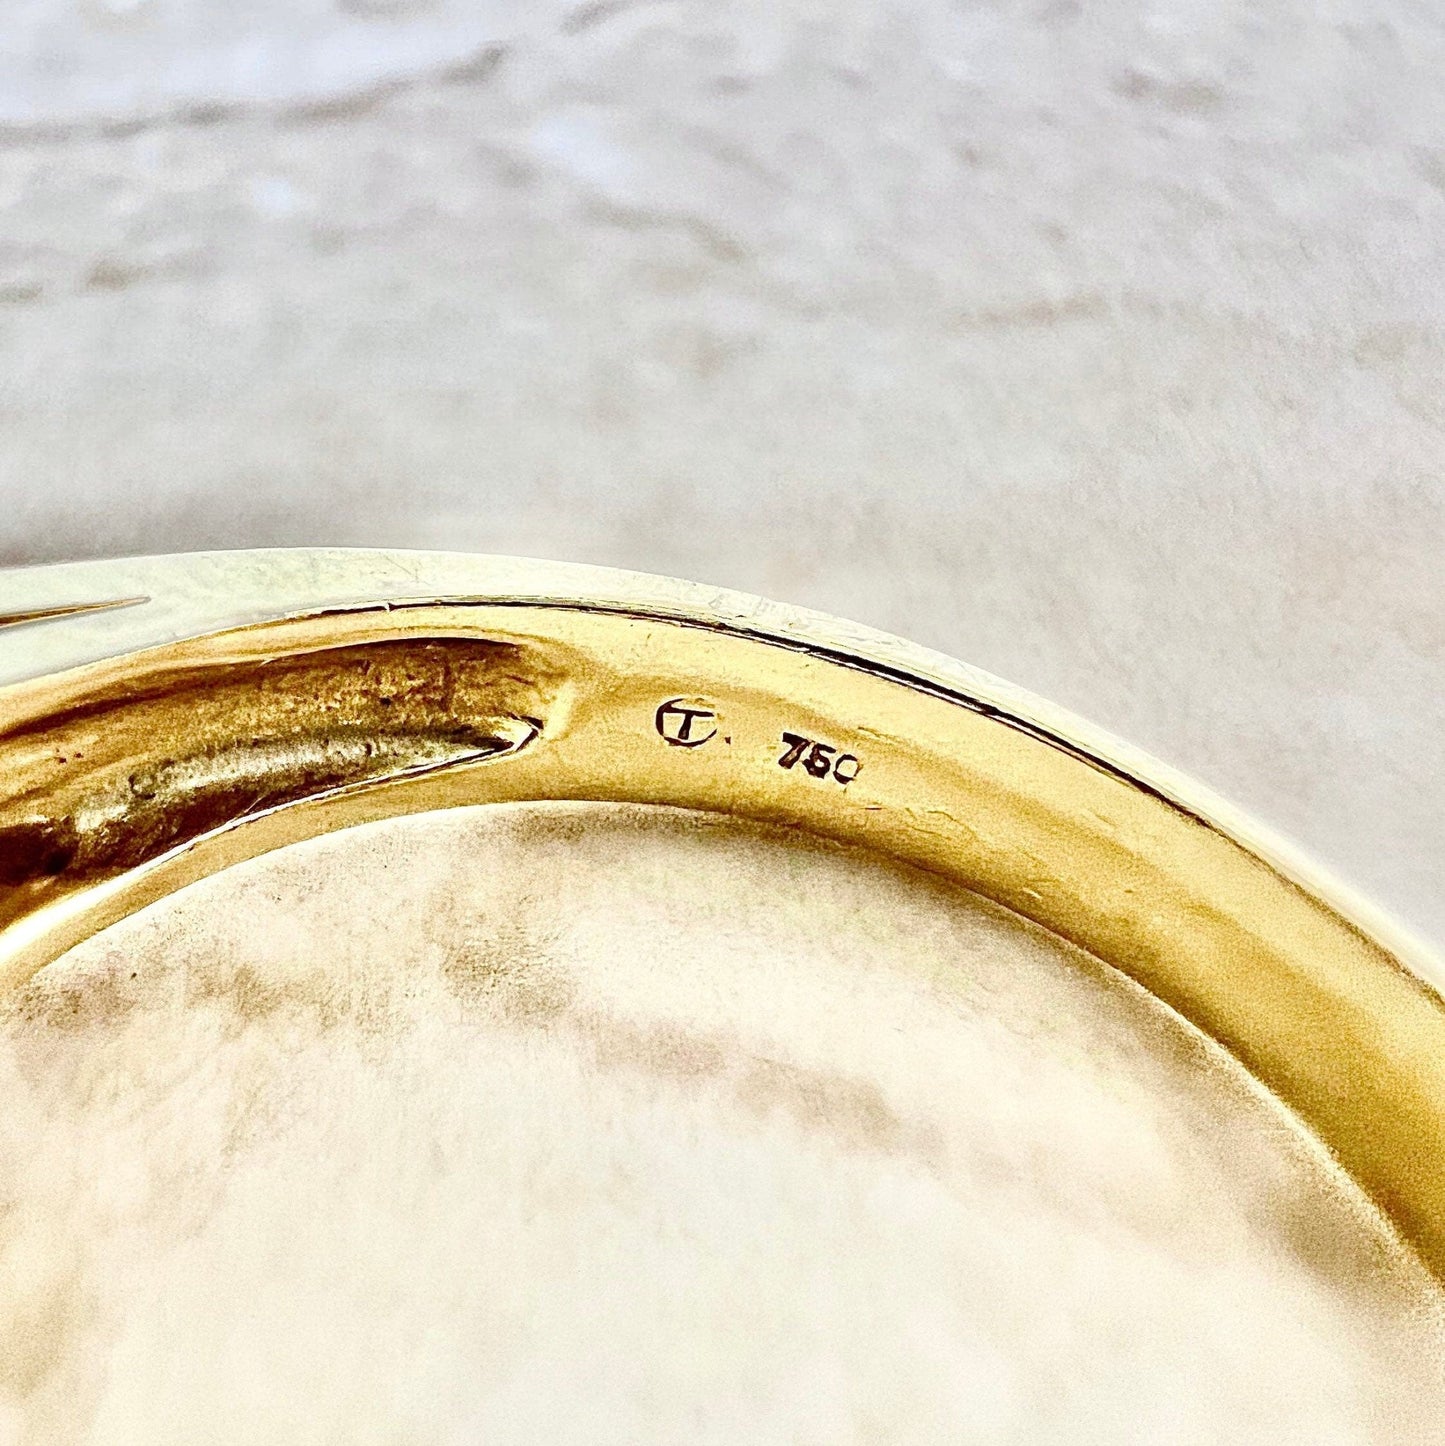 18K Three Stone Diamond Ring - Yellow Gold Diamond Cocktail Ring - Anniversary Ring - Promise Ring - Birthday Gift - Best Gift For Her